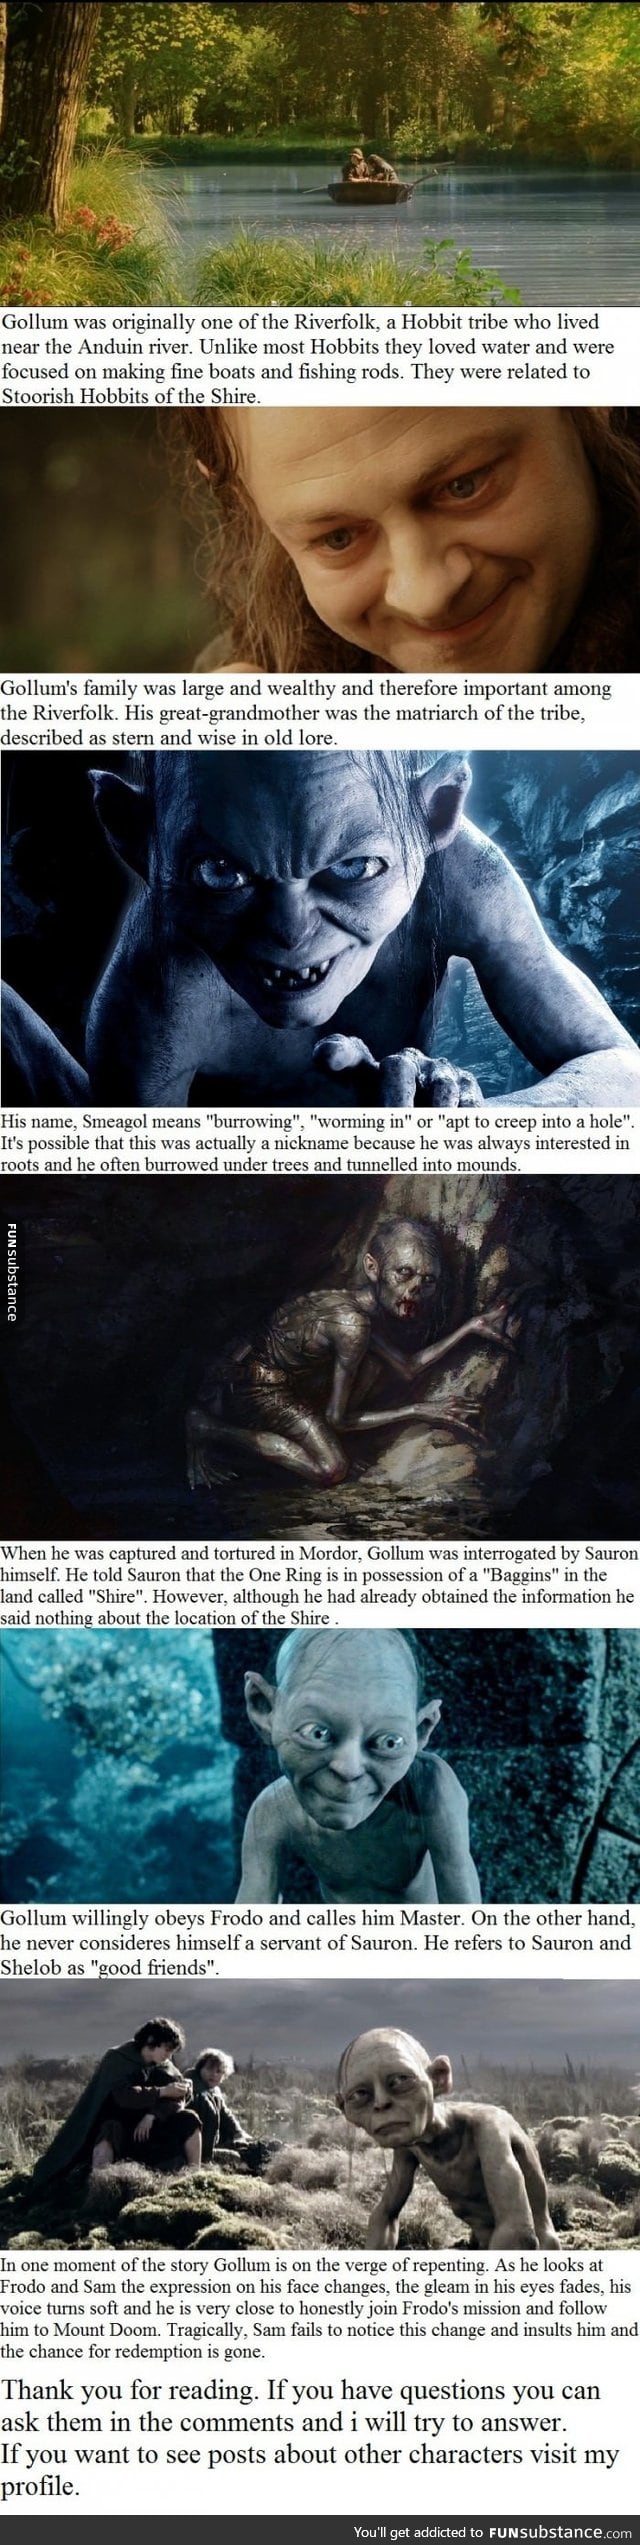 6 Gollum facts you may not have known